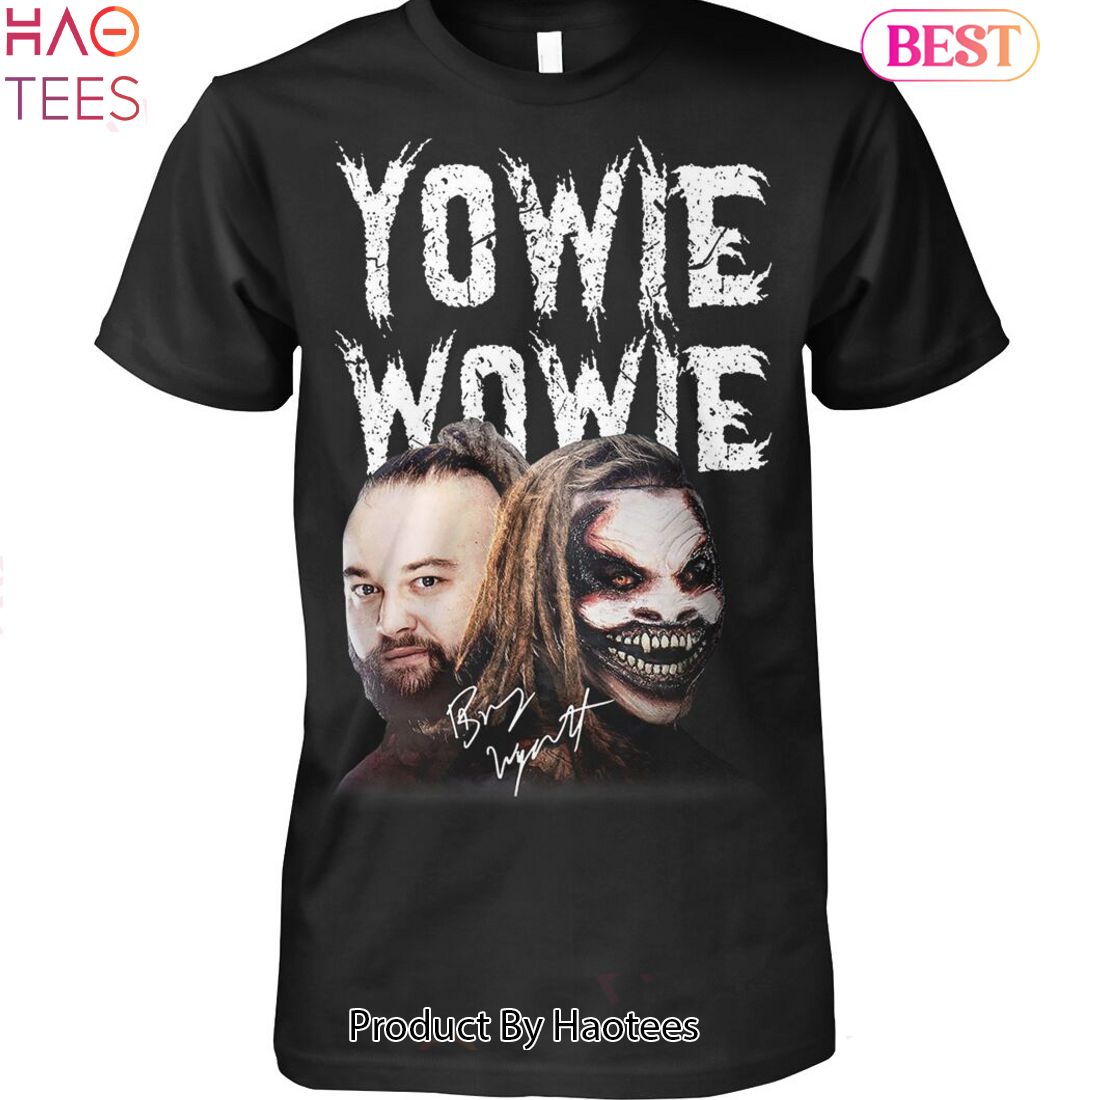 Yowie Wowie T-Shirts for Sale